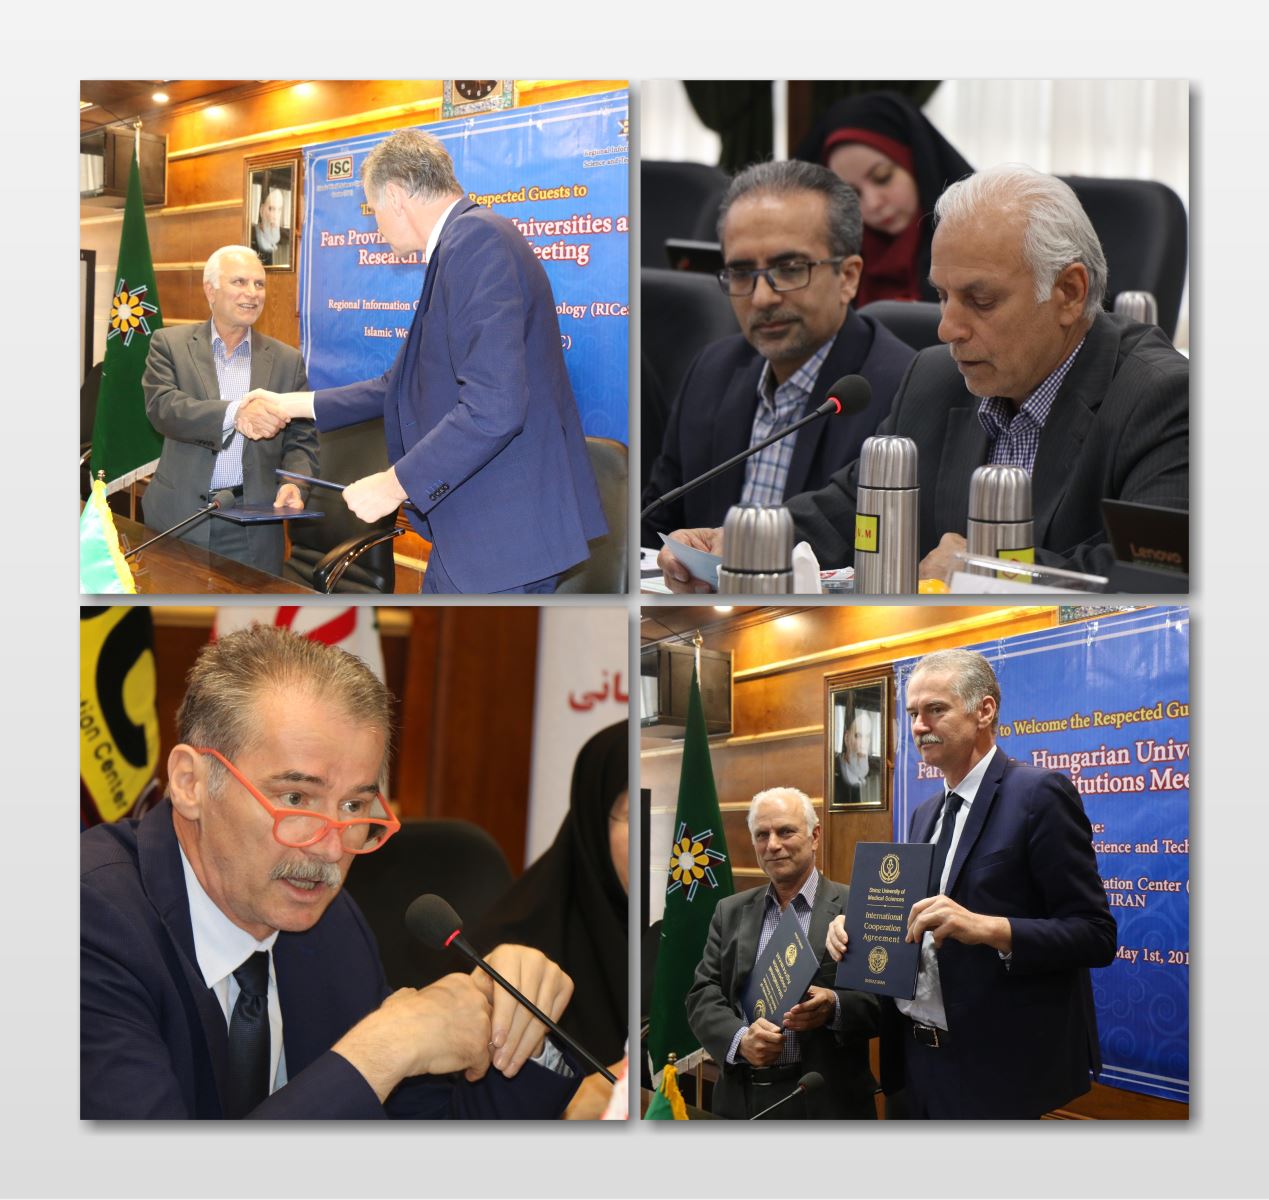 Shiraz University of Medical Sciences and Hungarian Universities Pave the Way for Future Collaborations